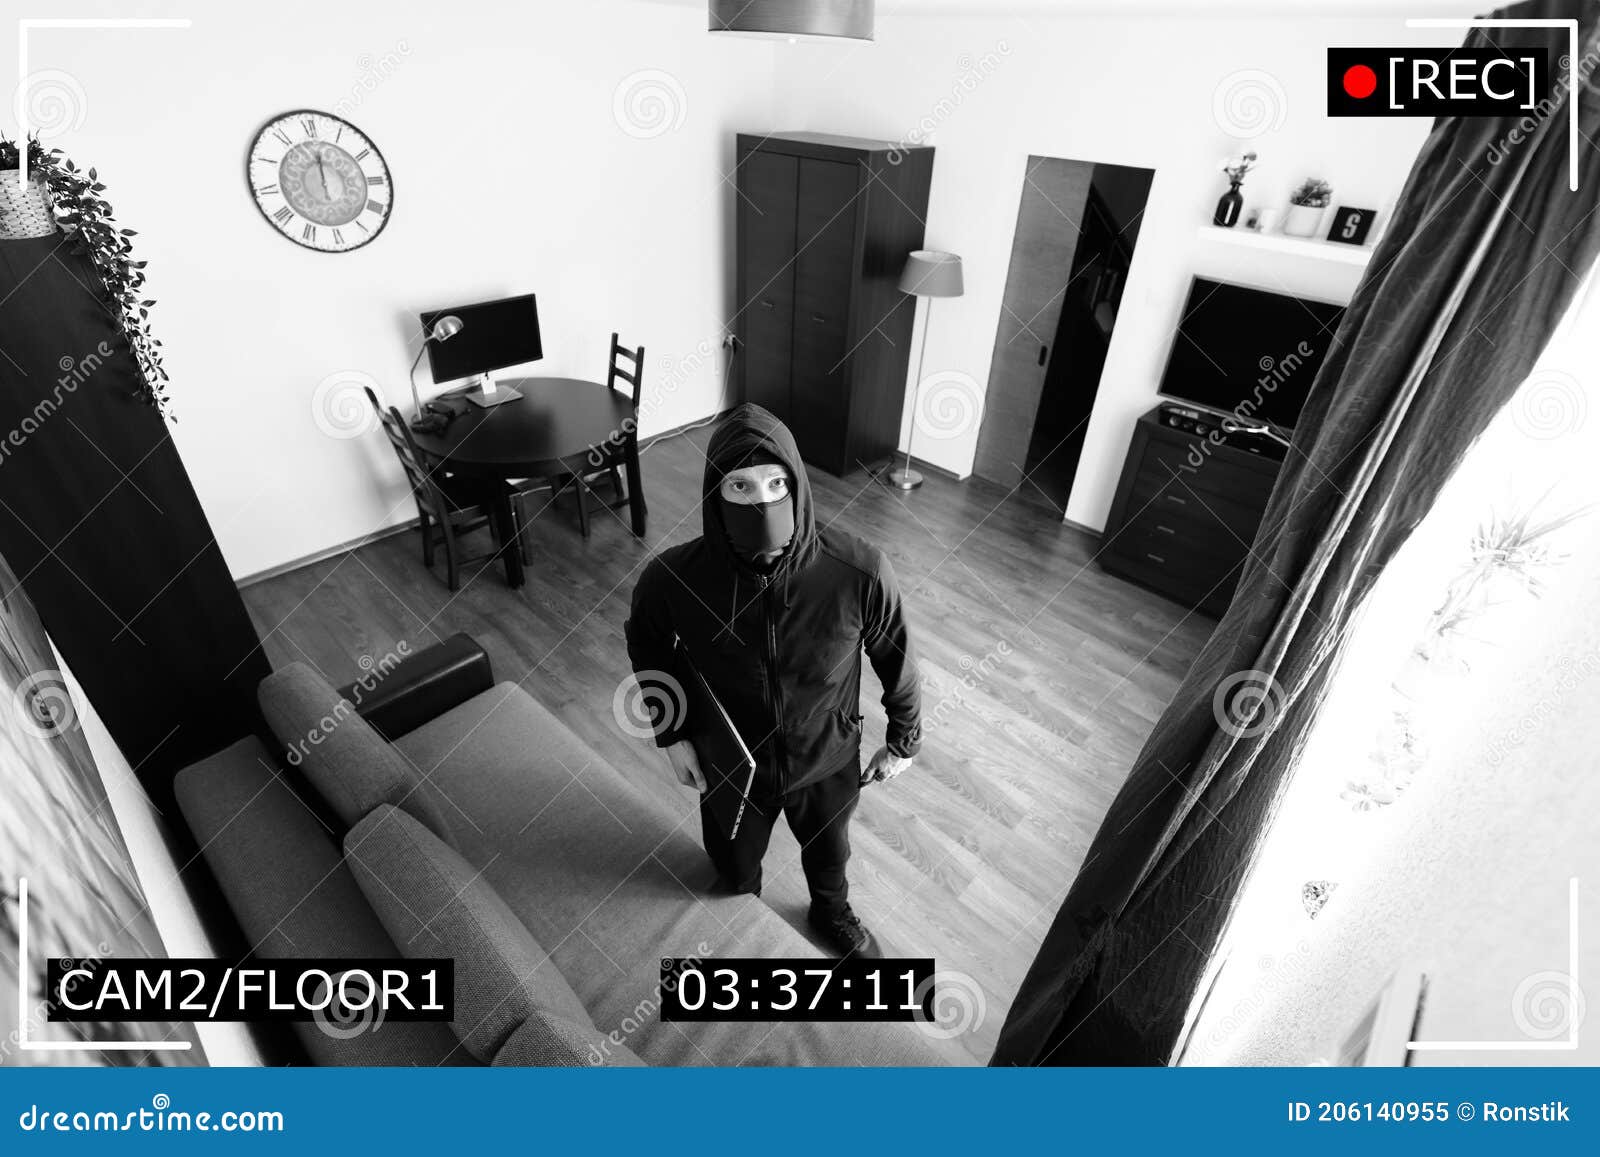 House Robbery Burglar Captured On Surveillance Security Camera In Room Stock Image Image Of